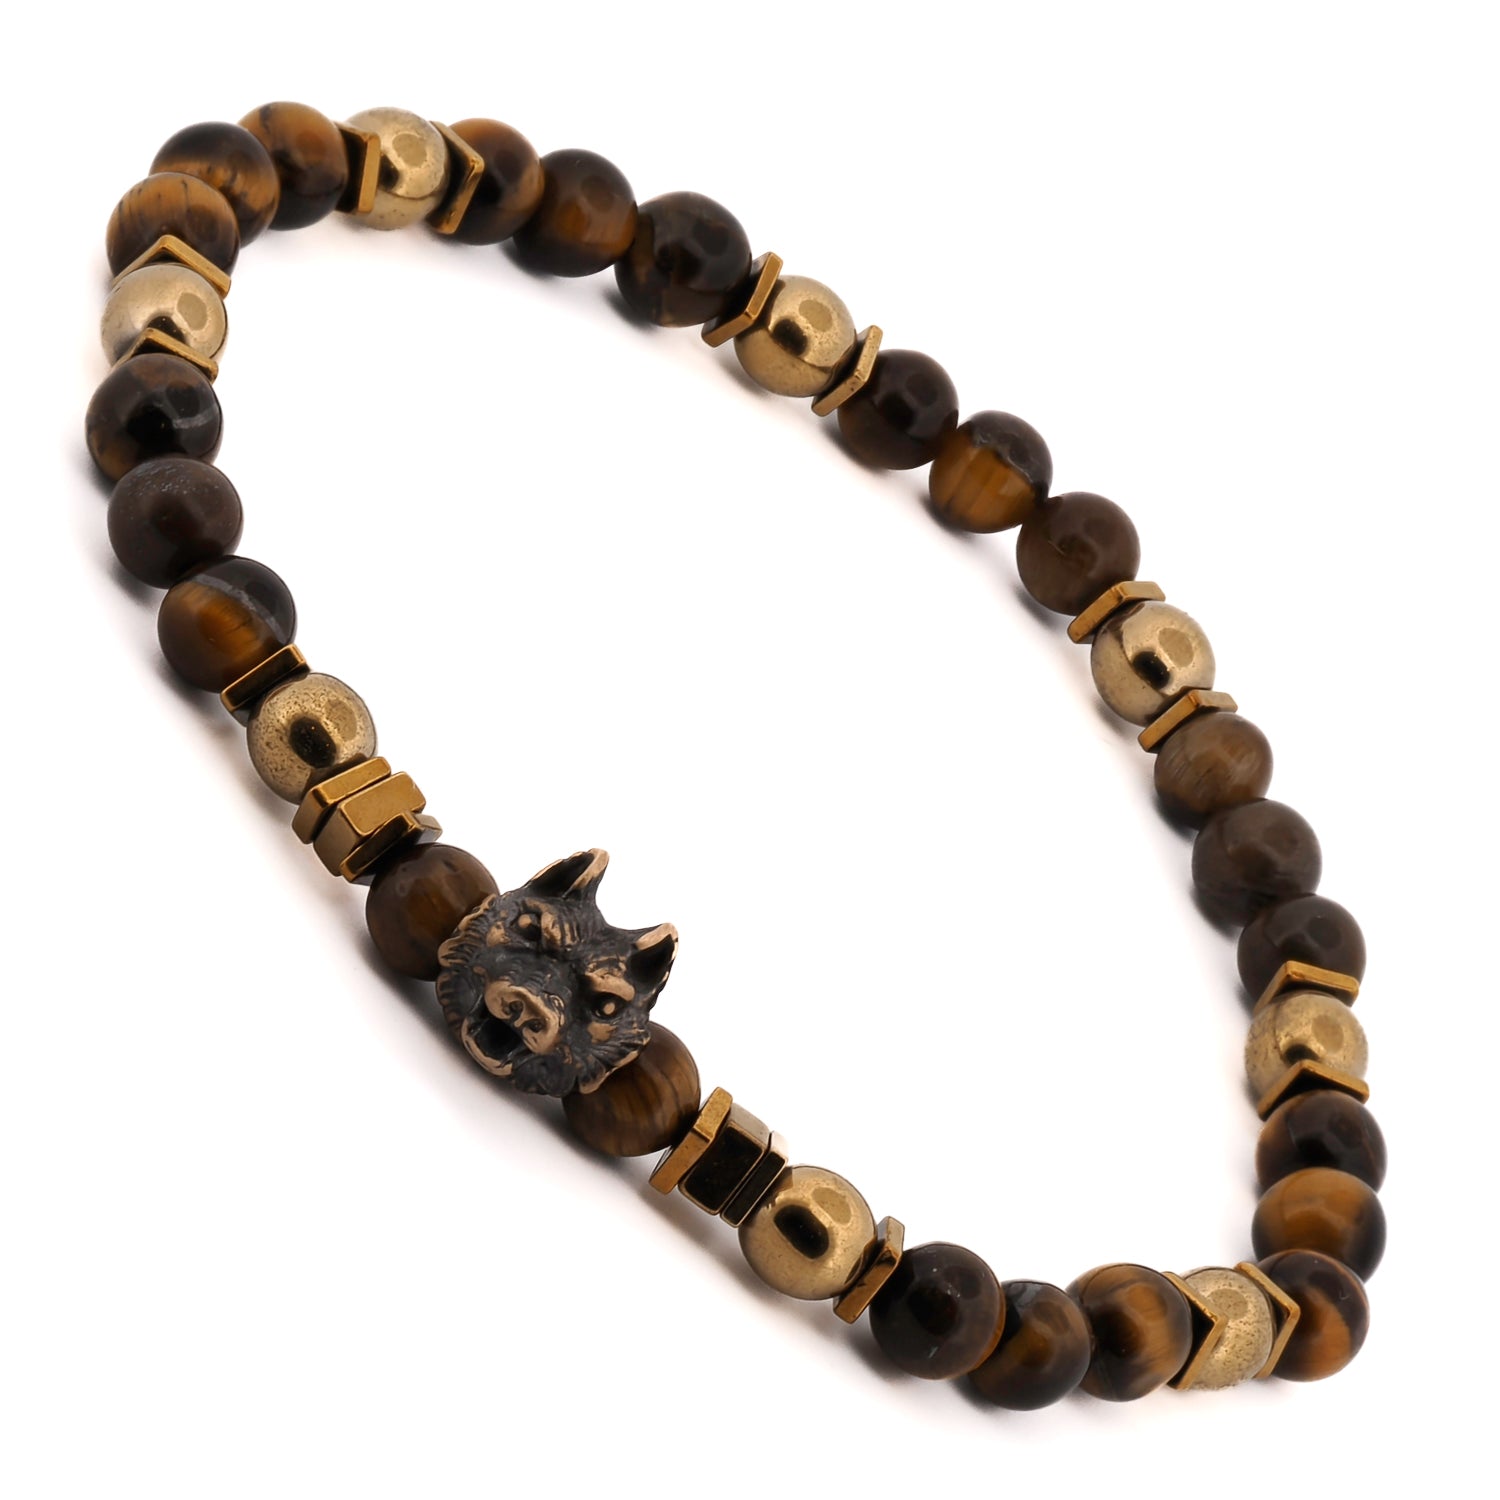 Handcrafted Freedom Wolf Bracelet with tiger's eye beads and a bronze wolf charm, designed for grounding and protection